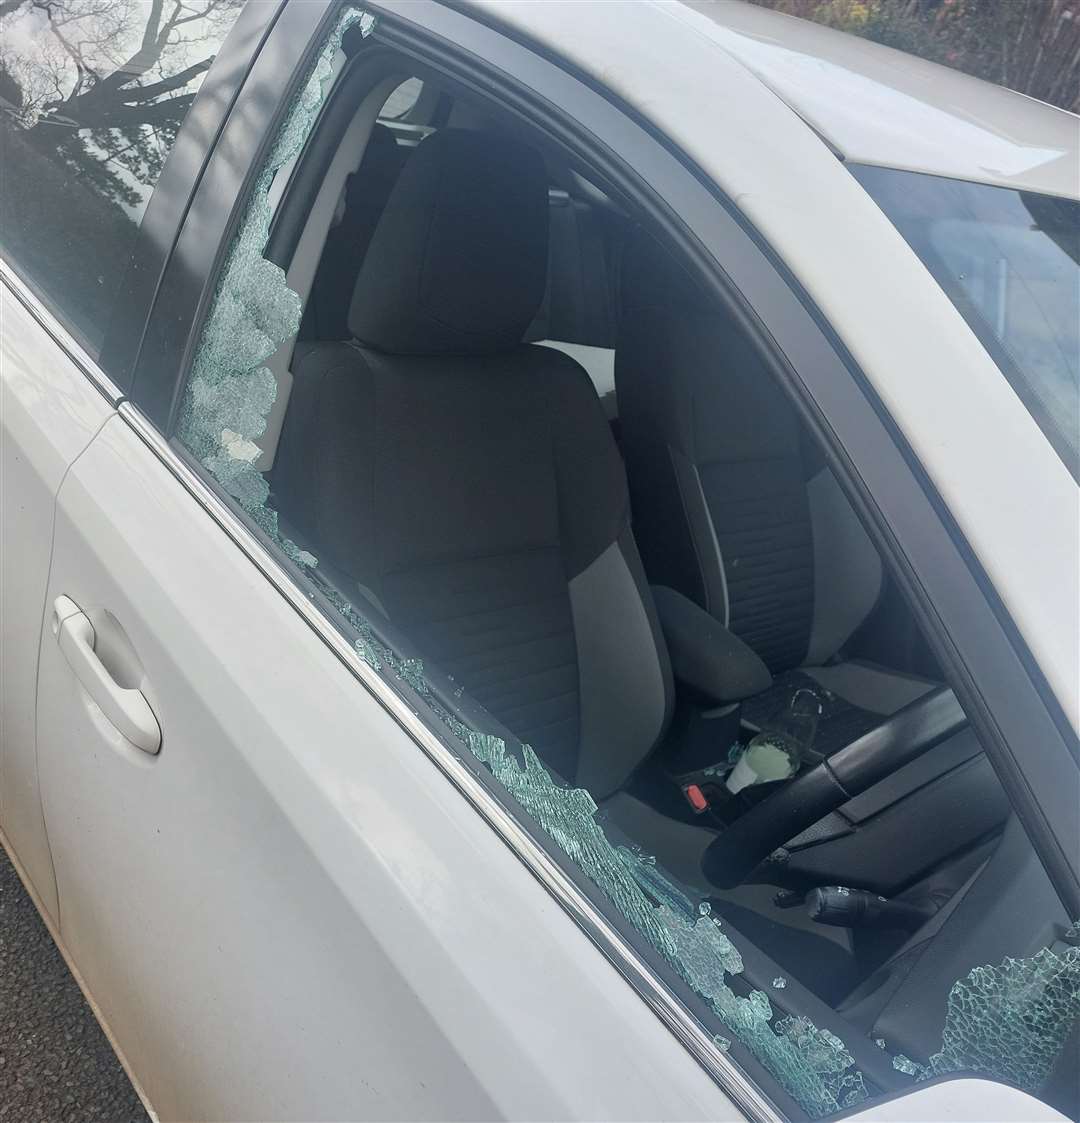 The 56-year-old woke up to find her car had been targeted by catapult vandals. Picture: Helen Blanche